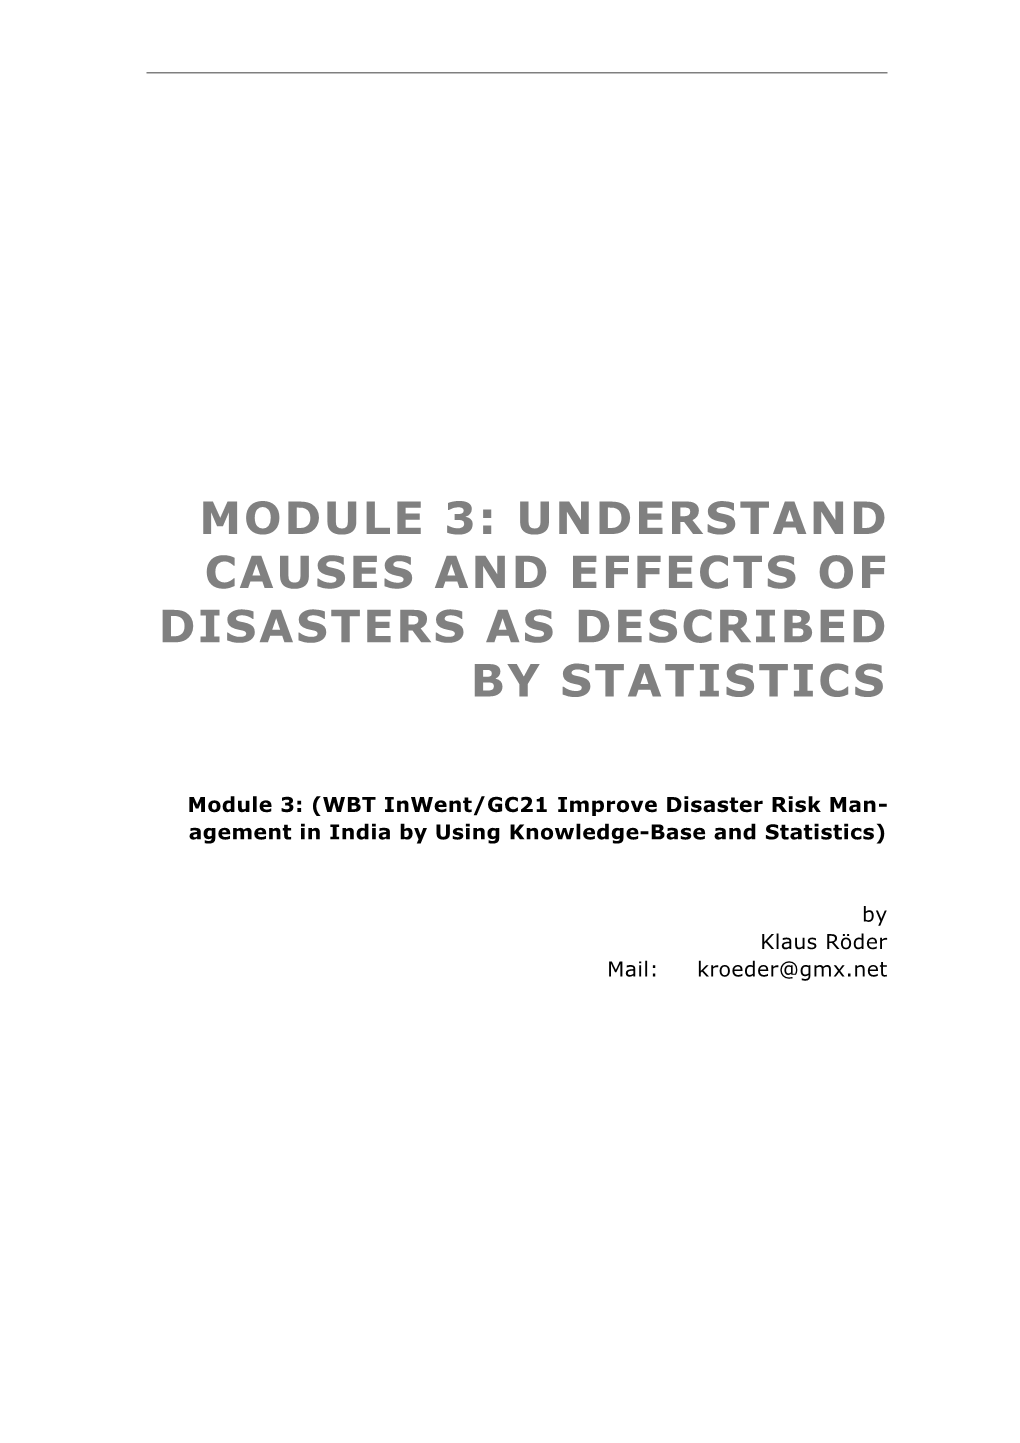 Module 3:Understand Causes and Effects of Disasters As Described by Statistics